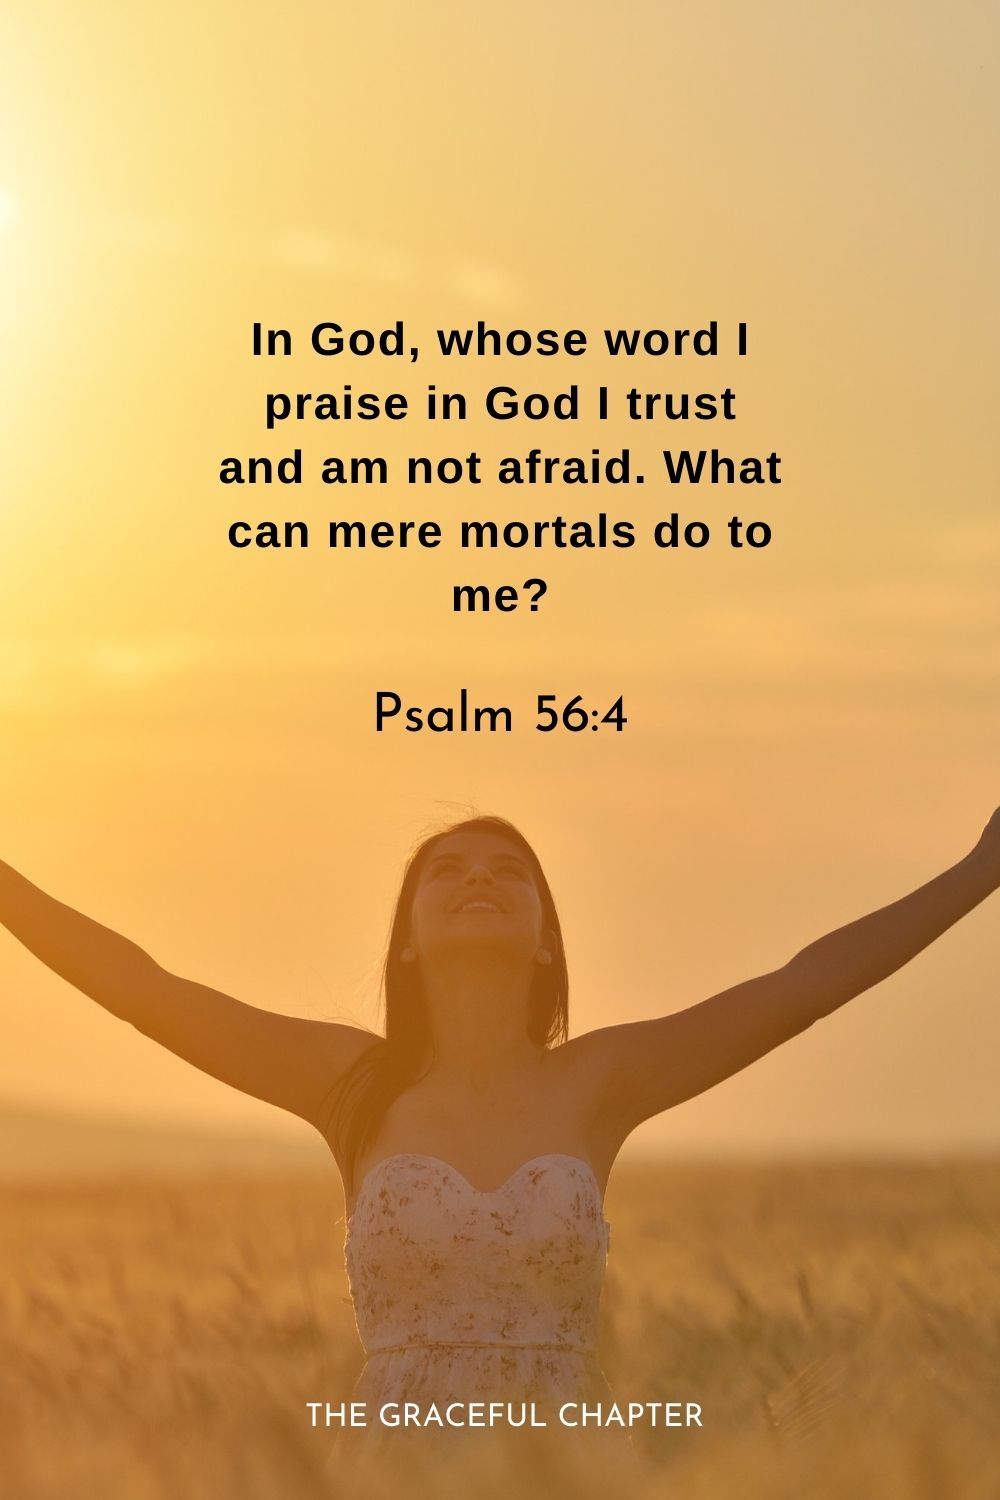 In God, whose word I praise in God I trust and am not afraid. What can mere mortals do to me?